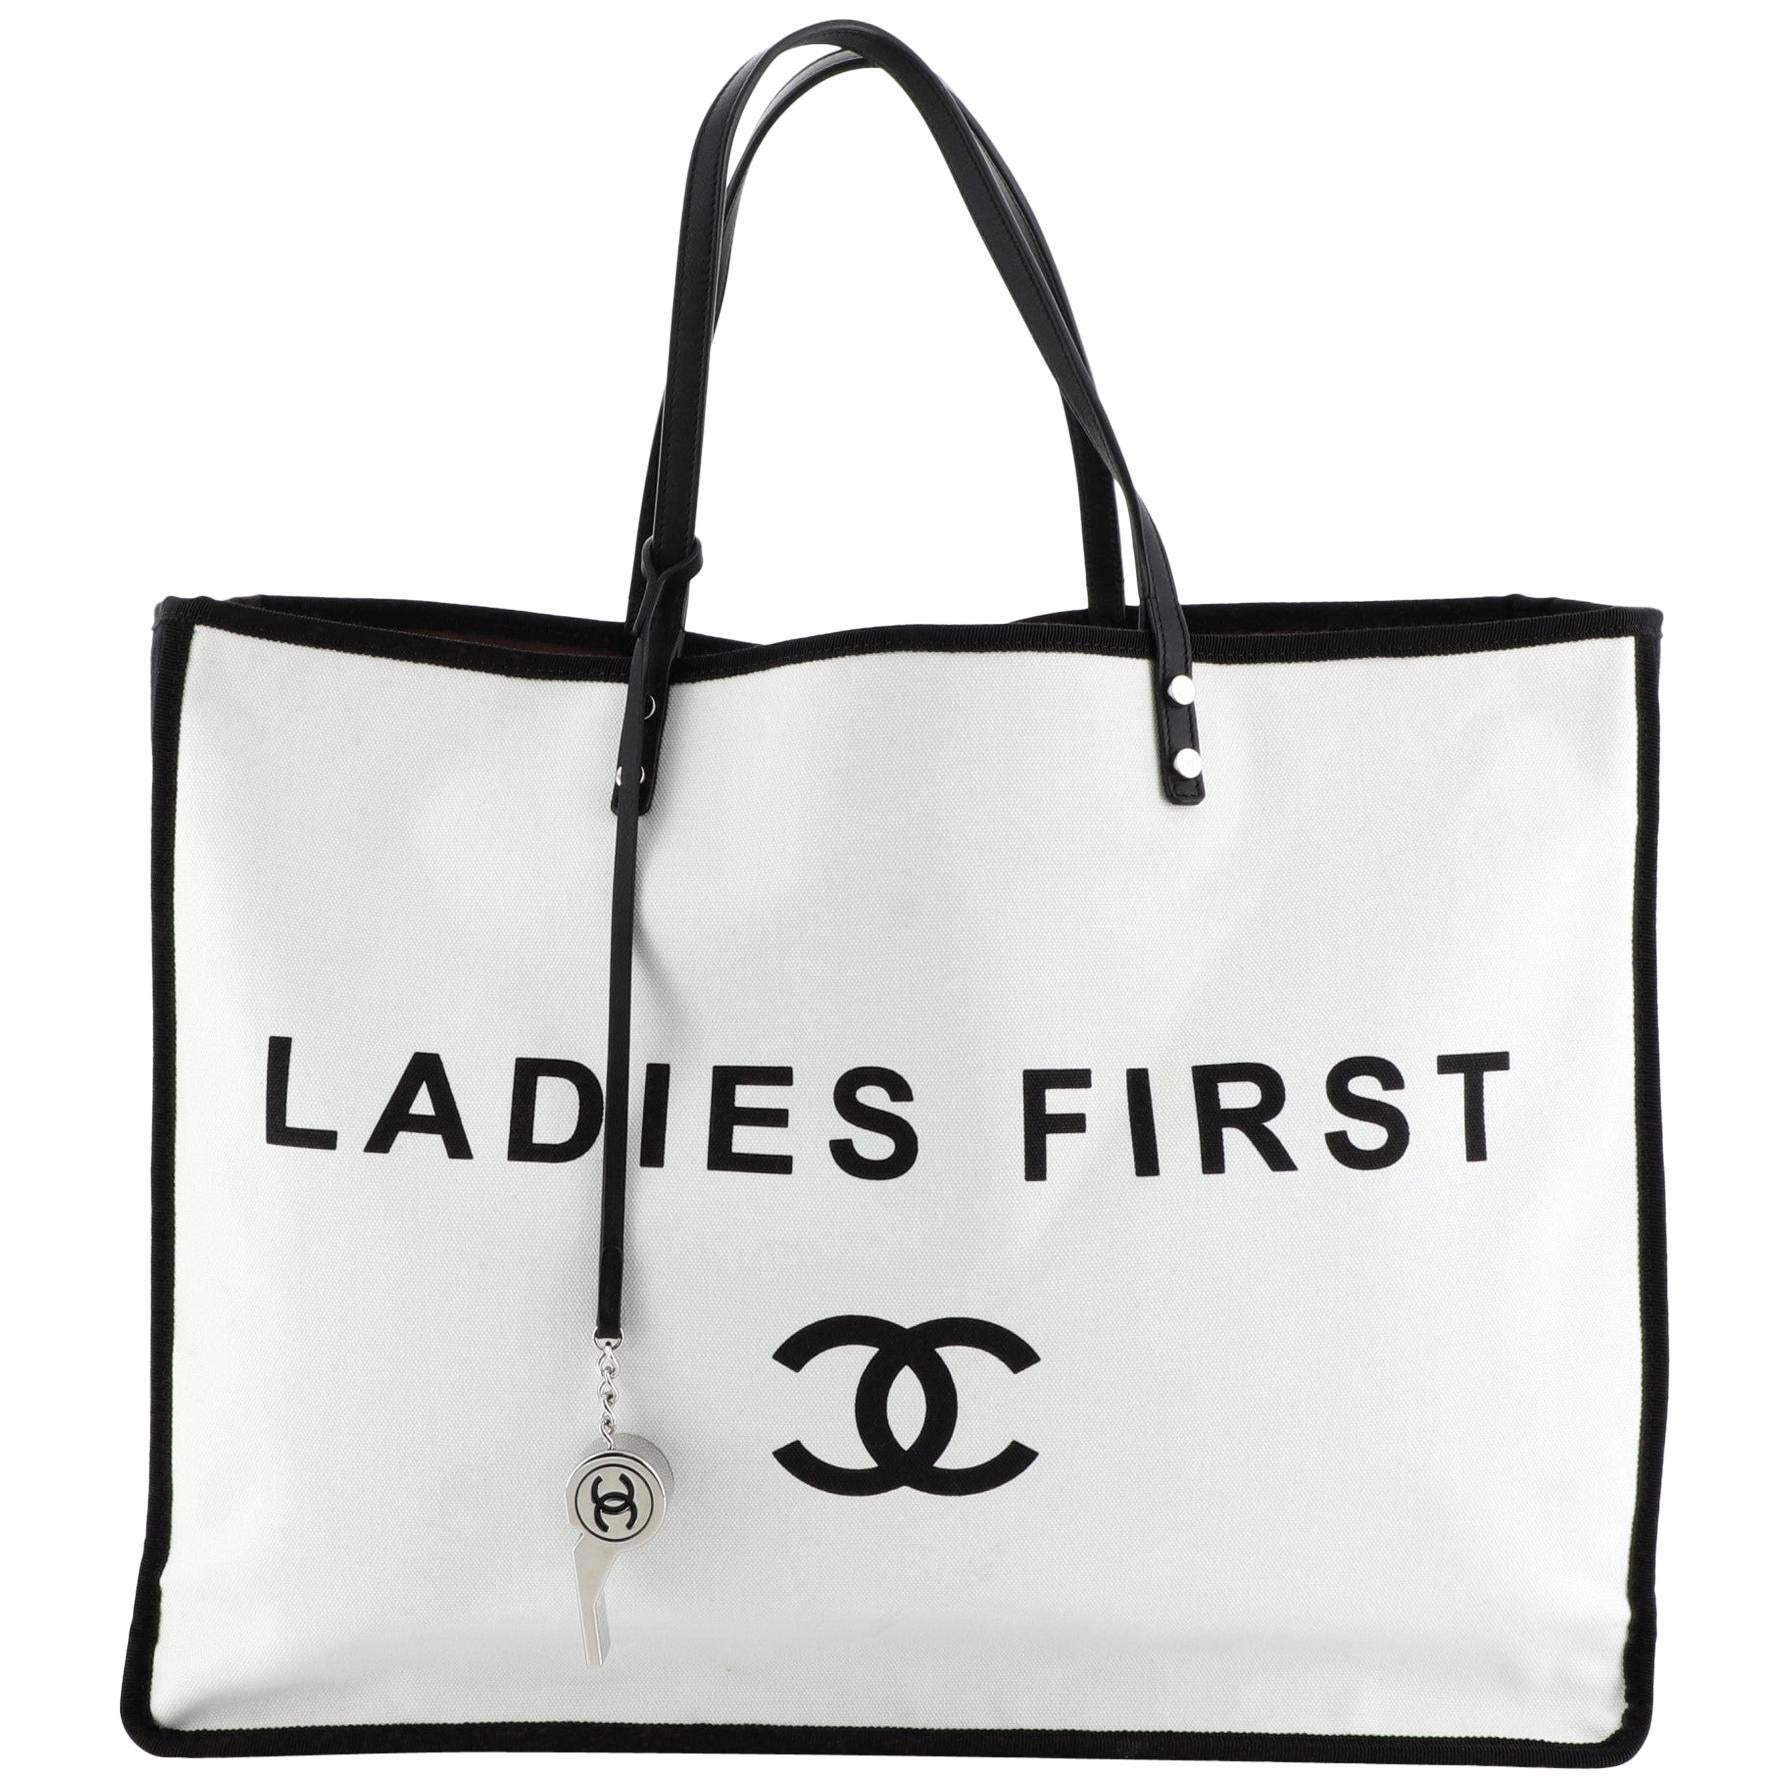 Chanel 'Ladies First' Canvas Tote Handbag With Whistle